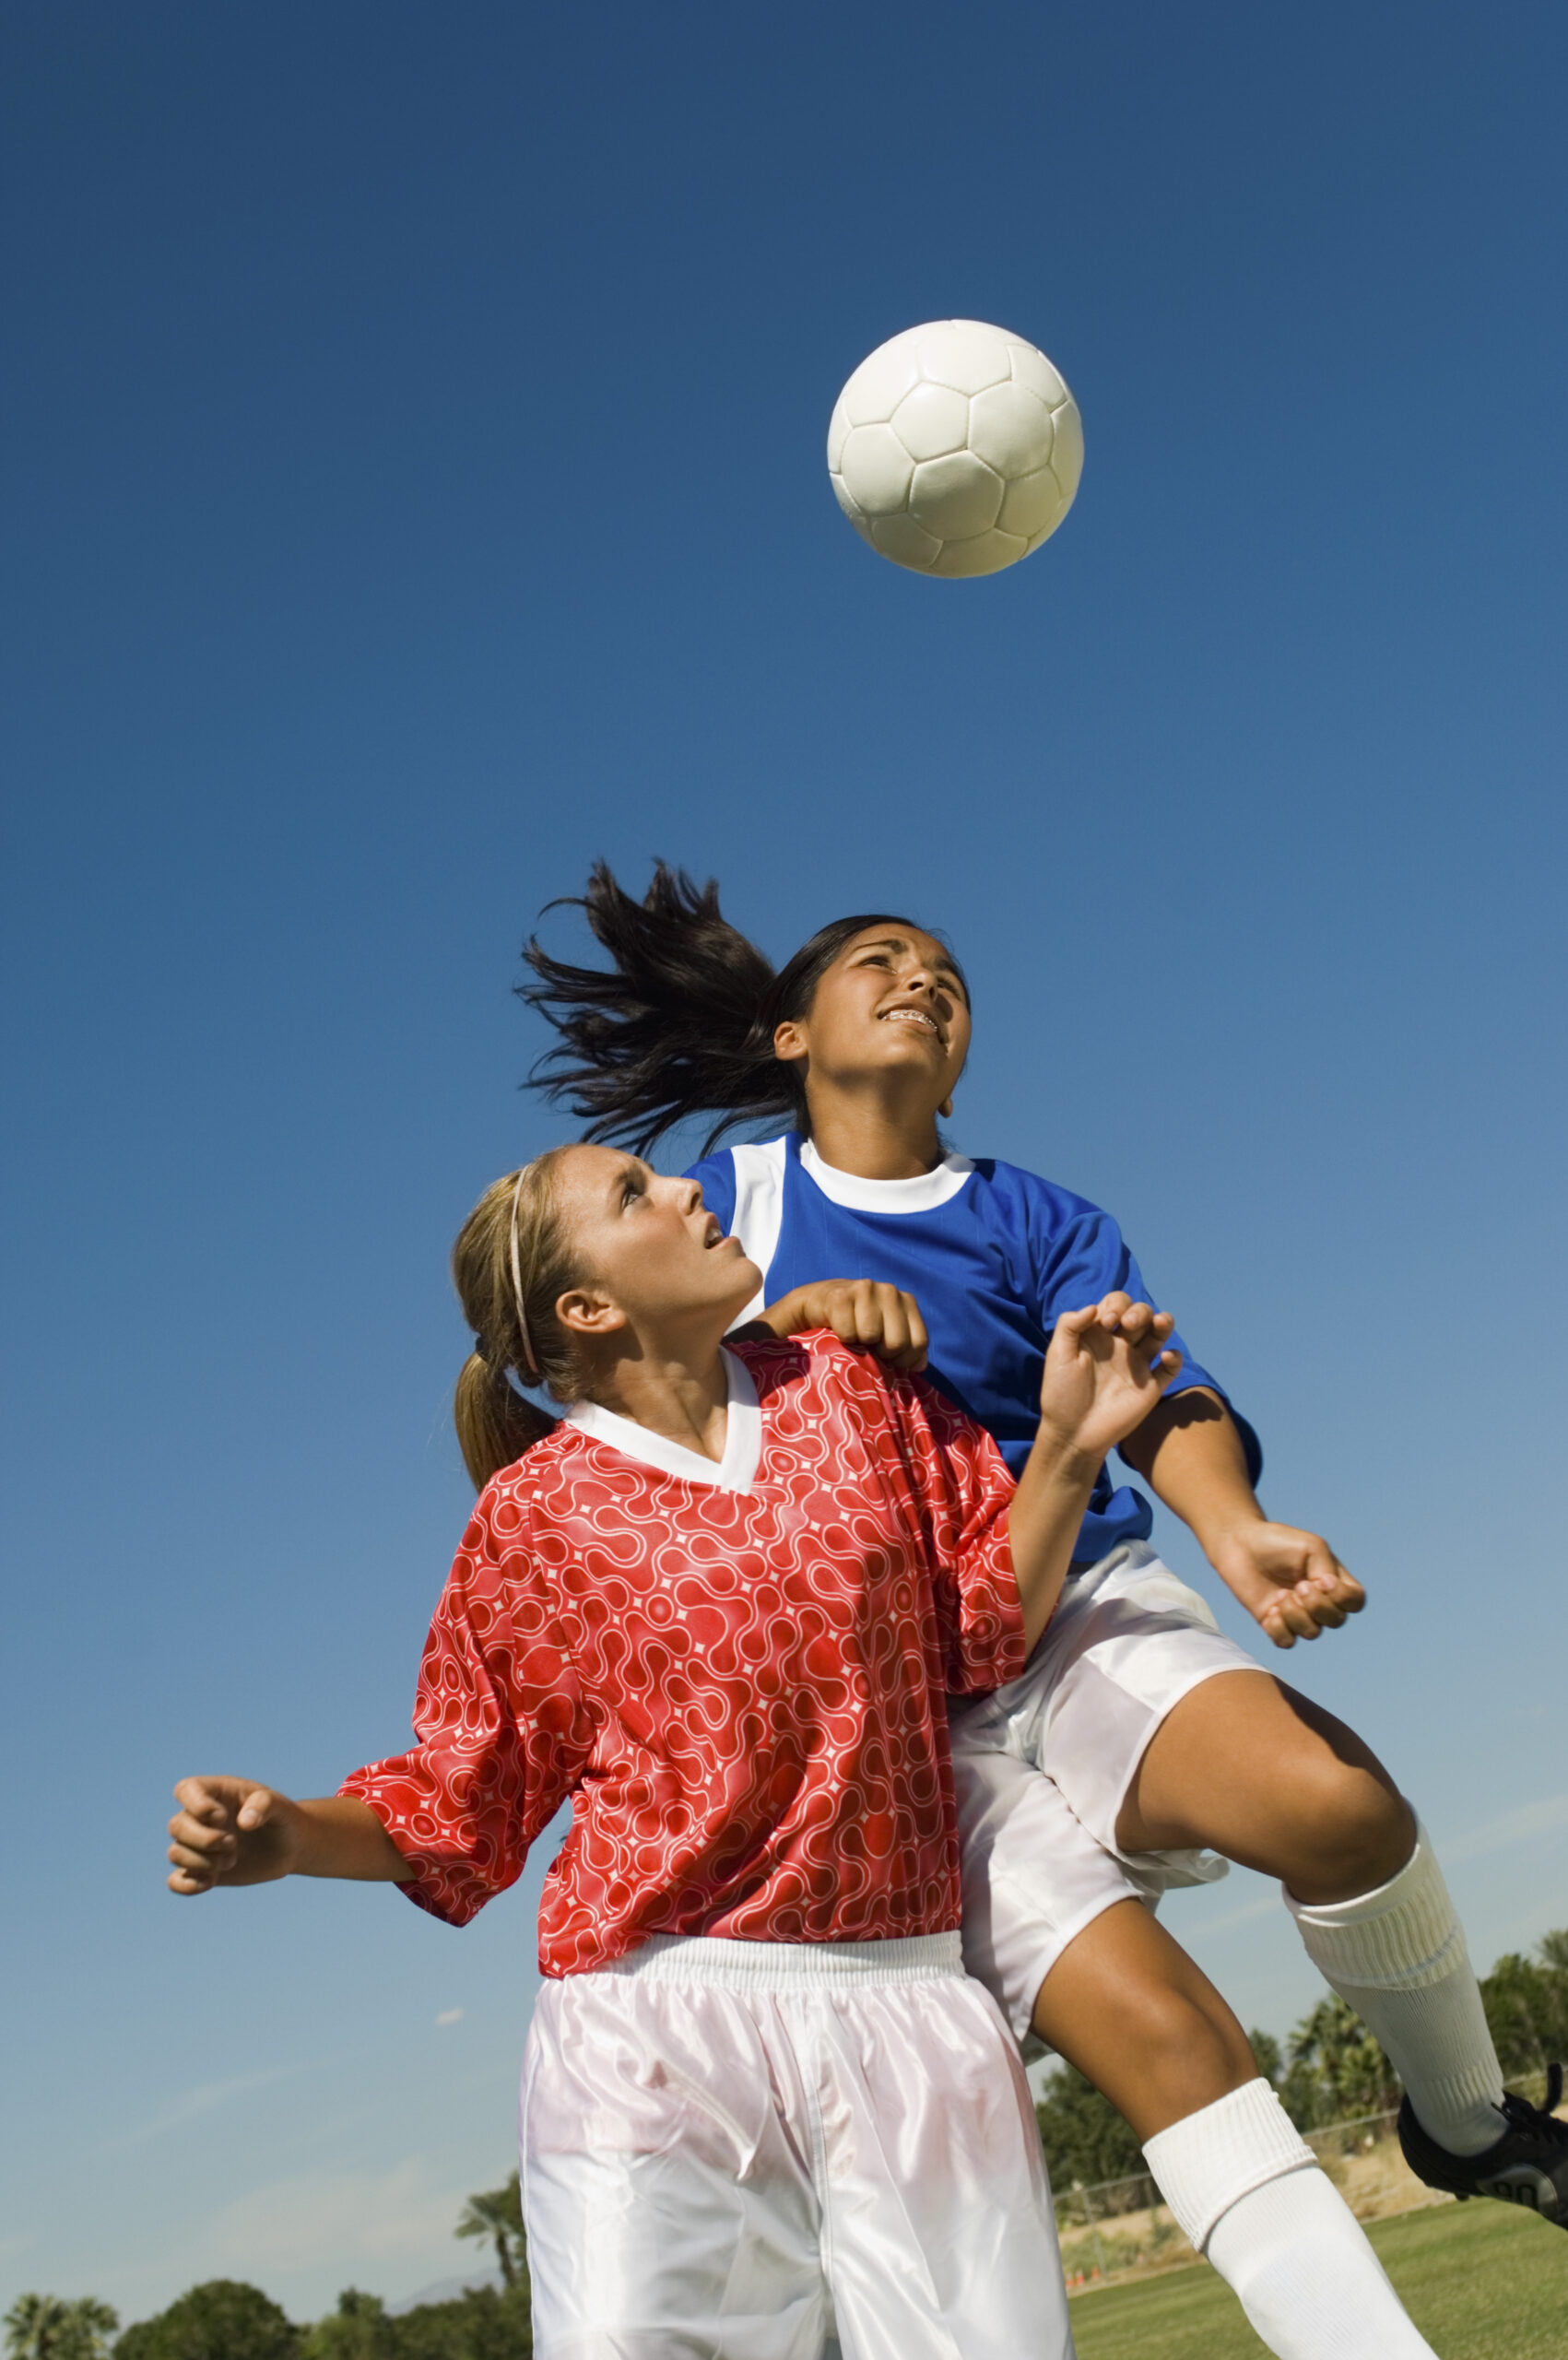 What happens to your brain when you head a soccer ball - Men's Journal